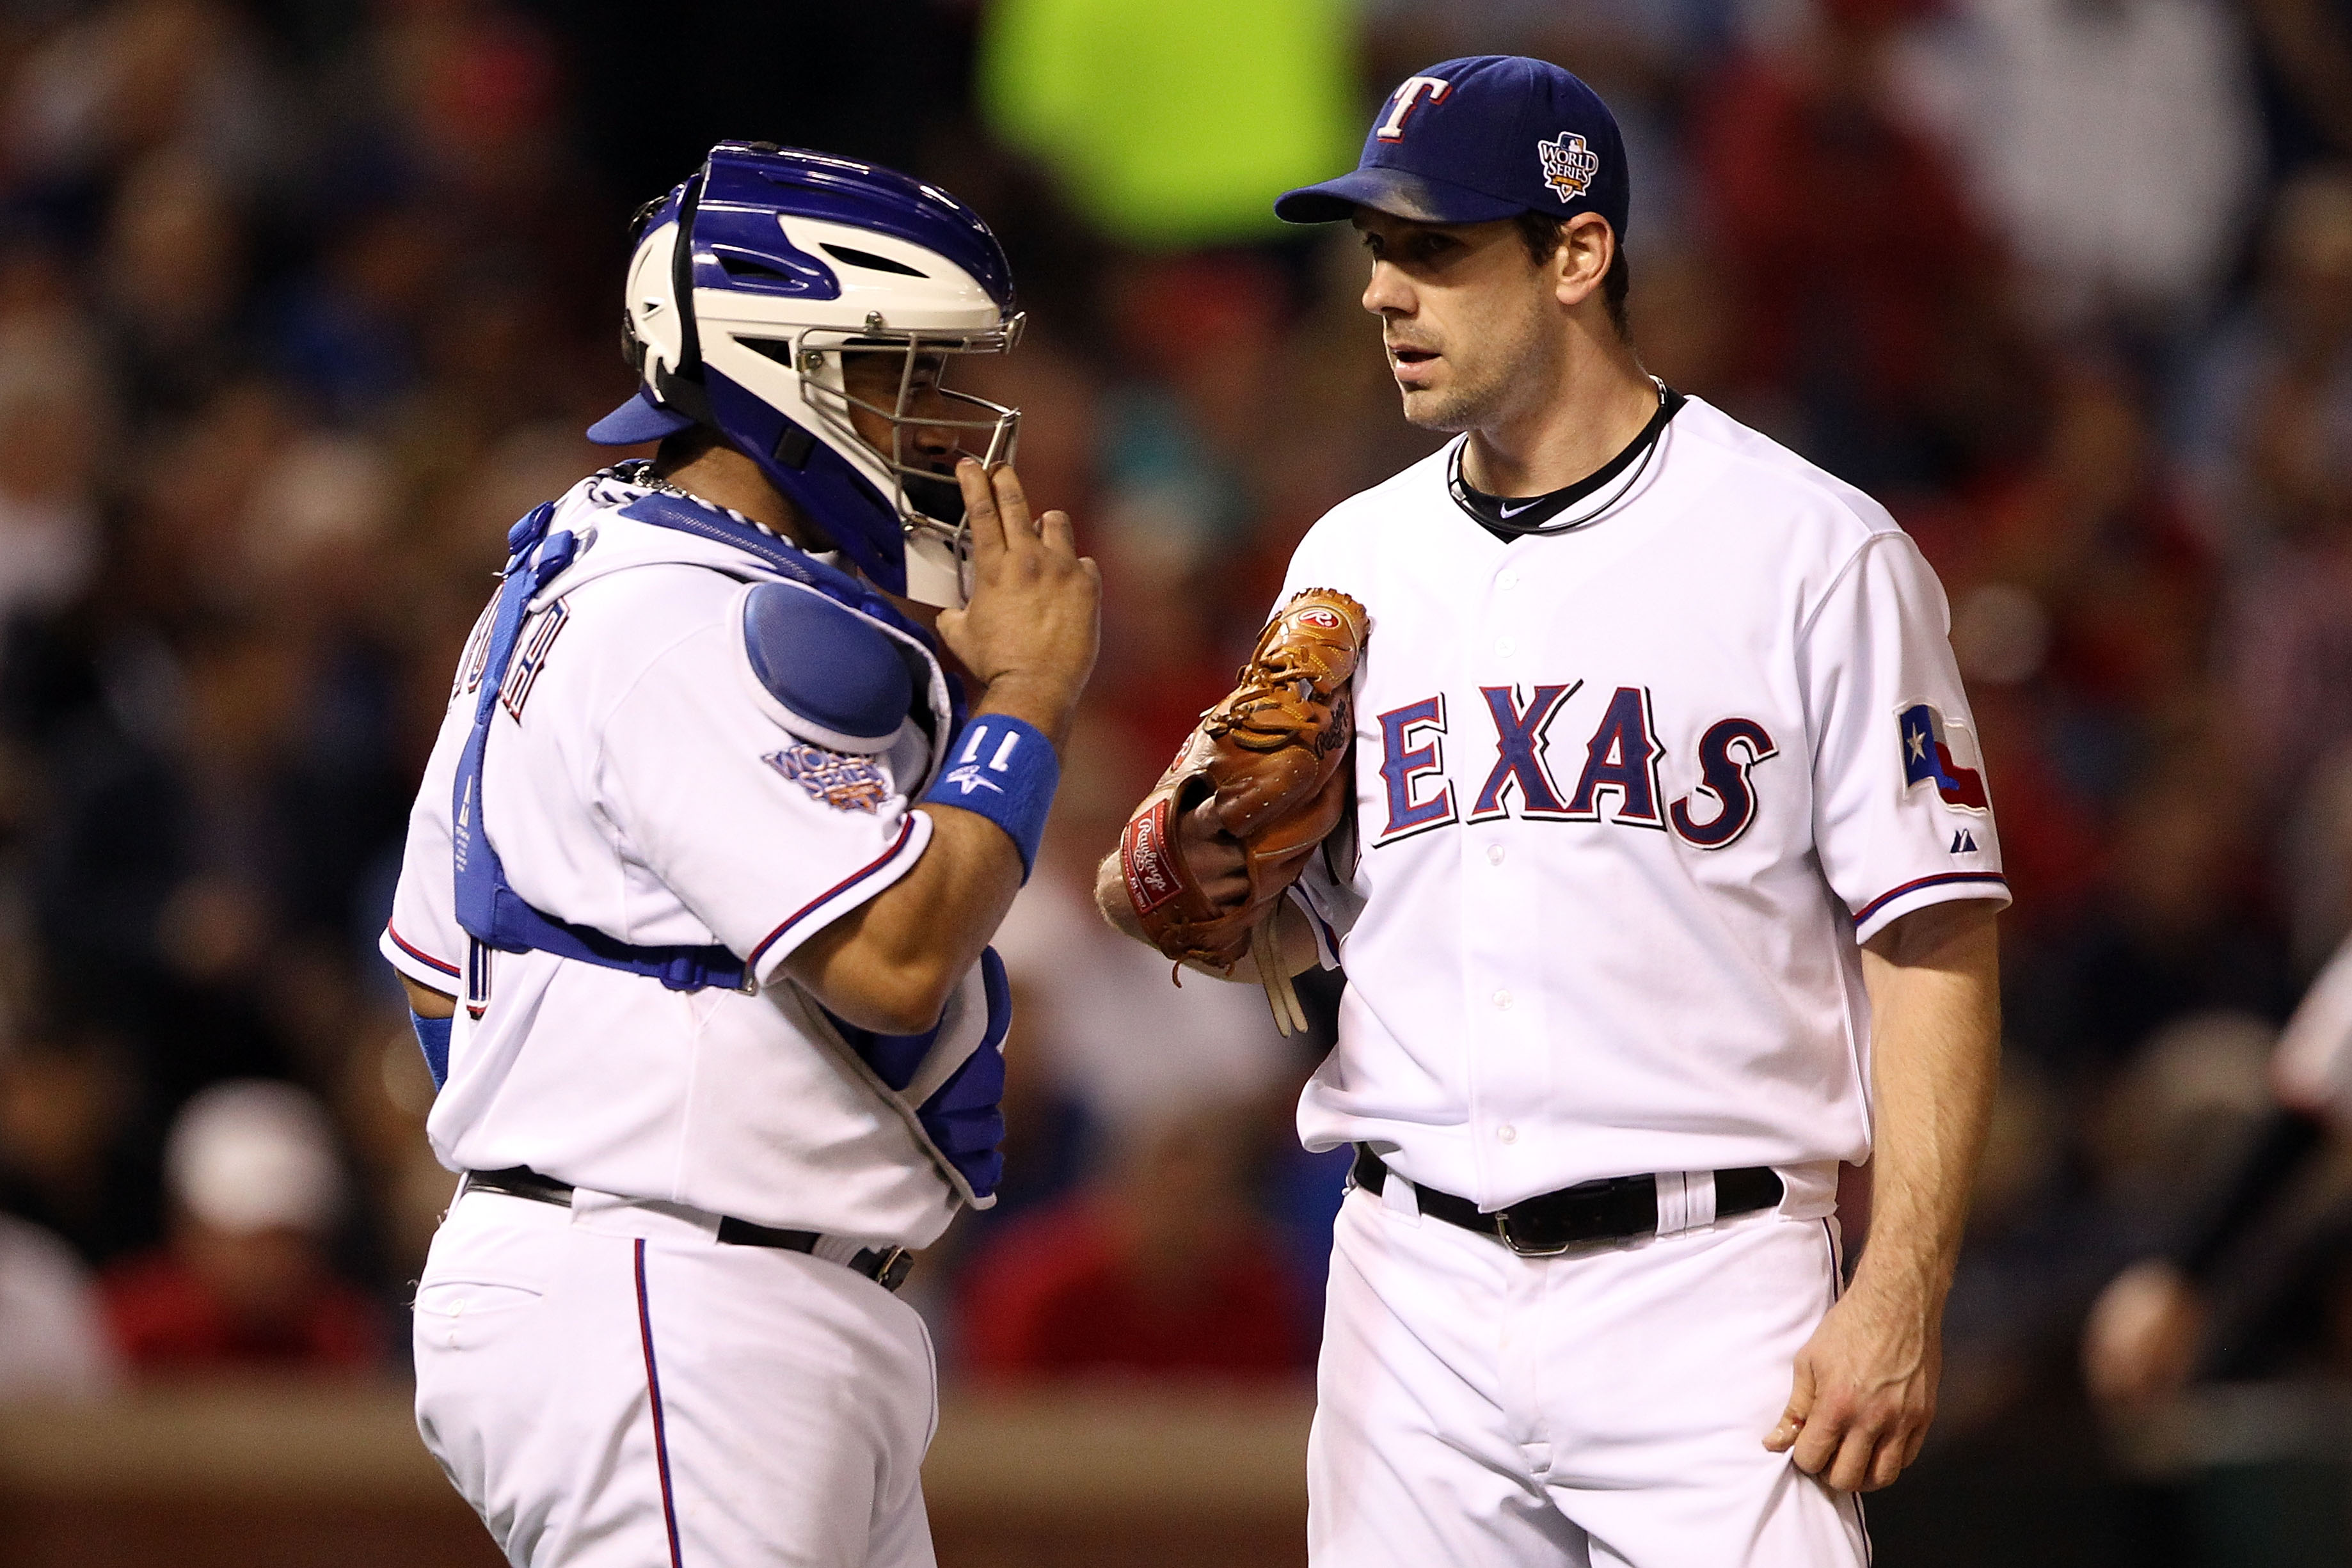 ARLINGTON, TX - NOVEMBER 01:  (L-R) Bengie Molina #11 and Cliff Lee #33 of the Texas Rangers talk on the mound against the San Francisco Giants in Game Five of the 2010 MLB World Series at Rangers Ballpark in Arlington on November 1, 2010 in Arlington, Te